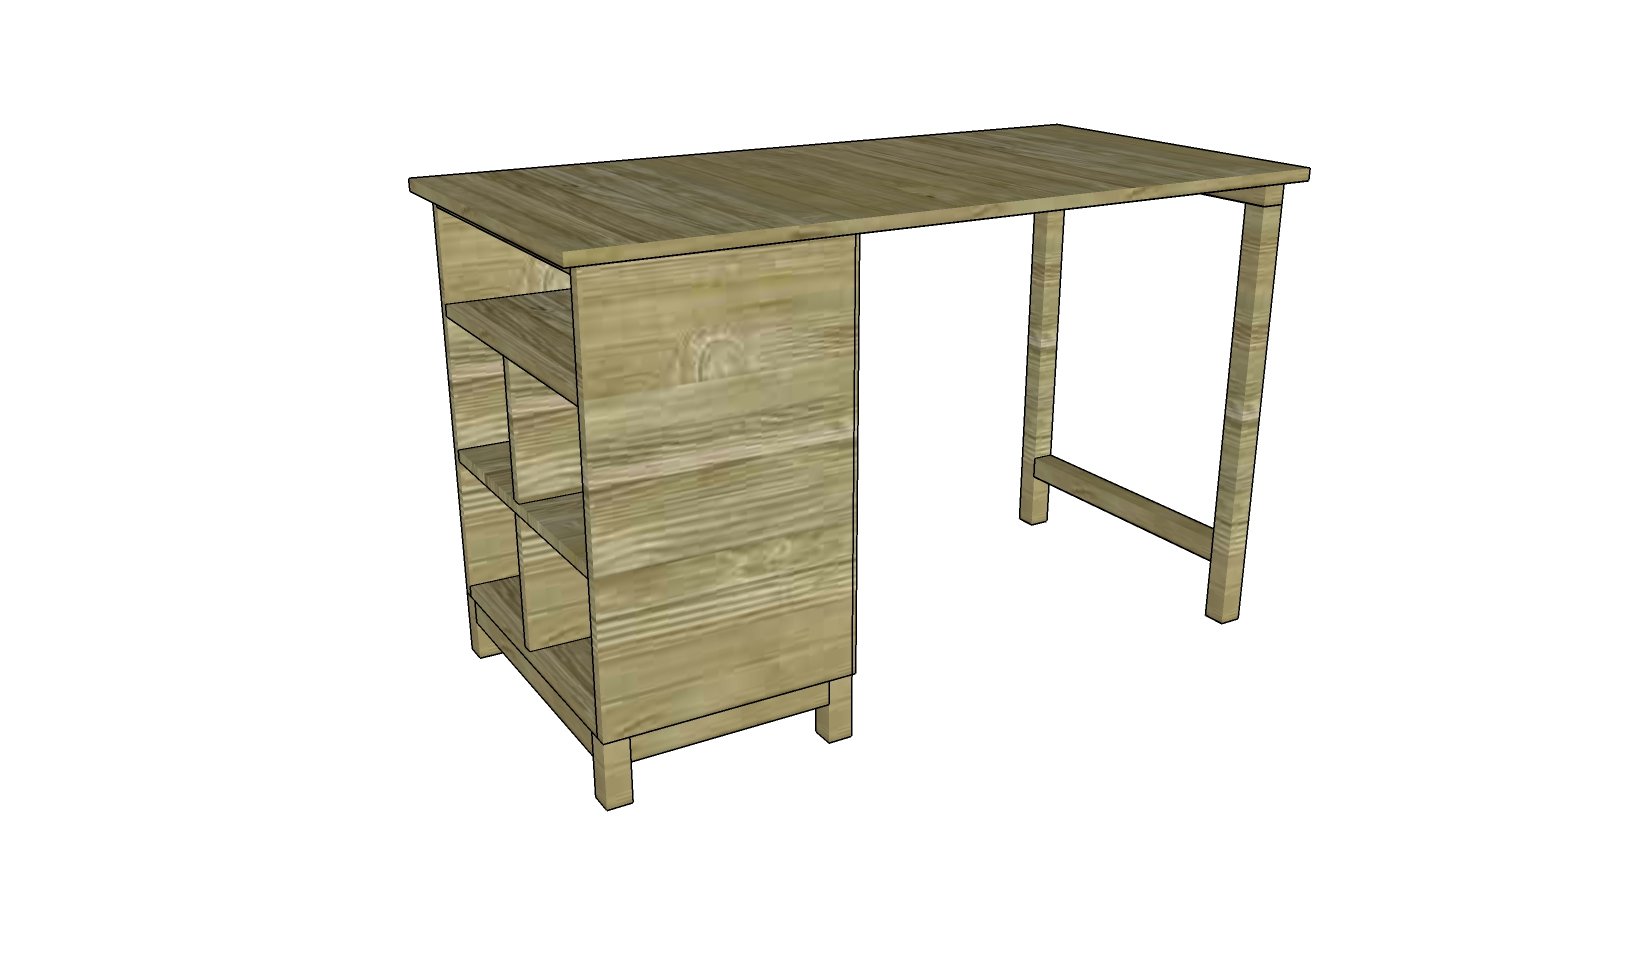 How to Build a Desk | Free Outdoor Plans - DIY Shed, Wooden Playhouse ...